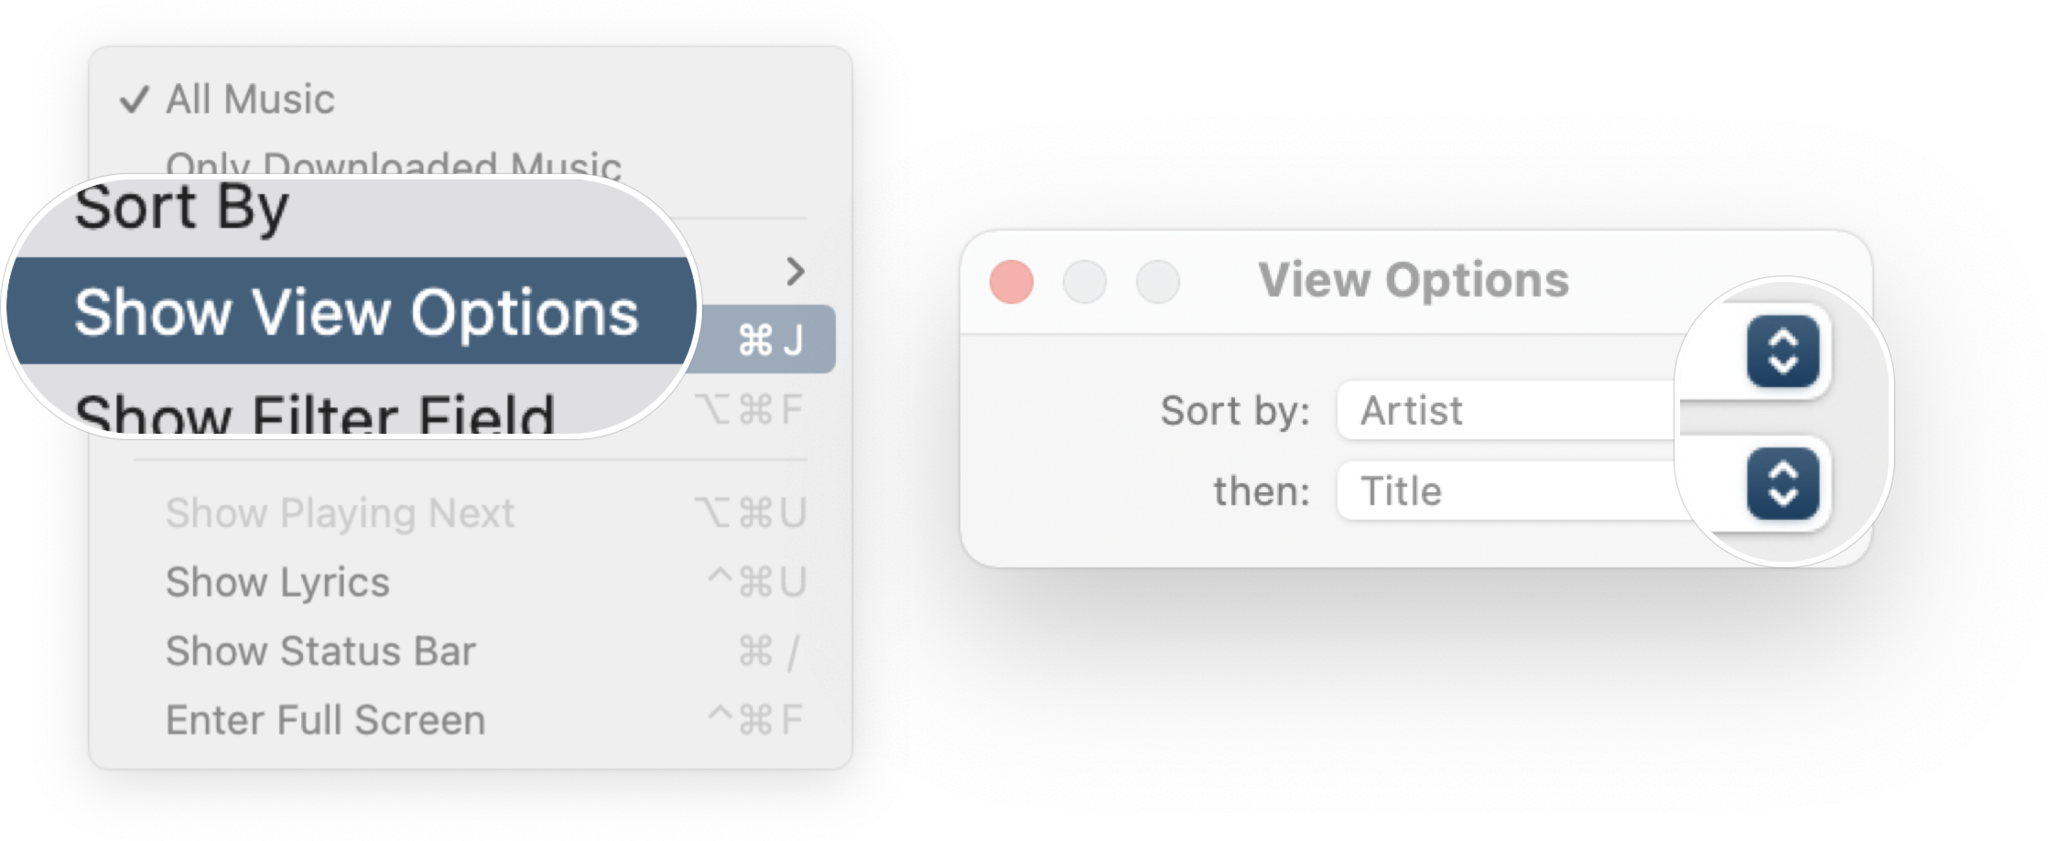 How To View And Sort Music In macOS Big Sur: Click show view options and then click the drop-down next to sort by and choose and option. 